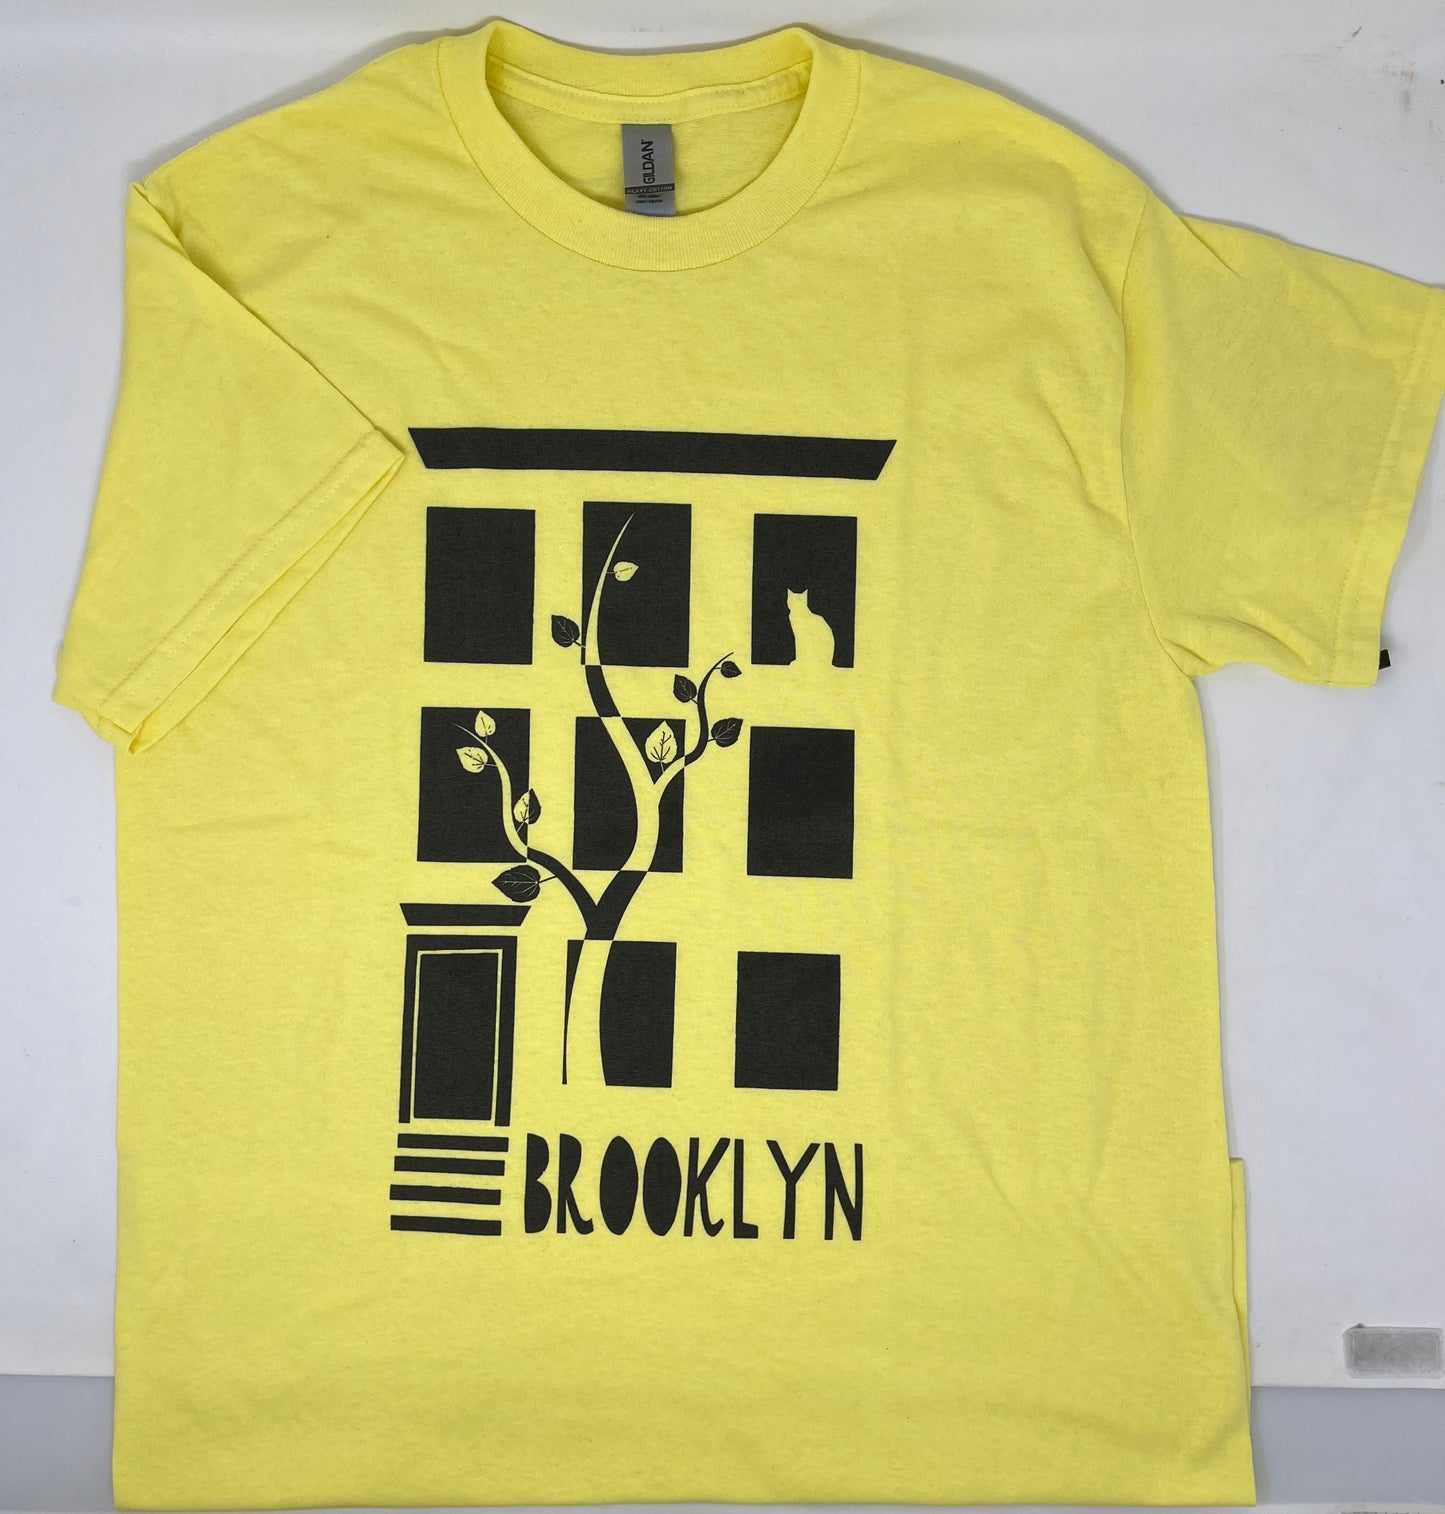 Brownstone Adult T Yellow Size L